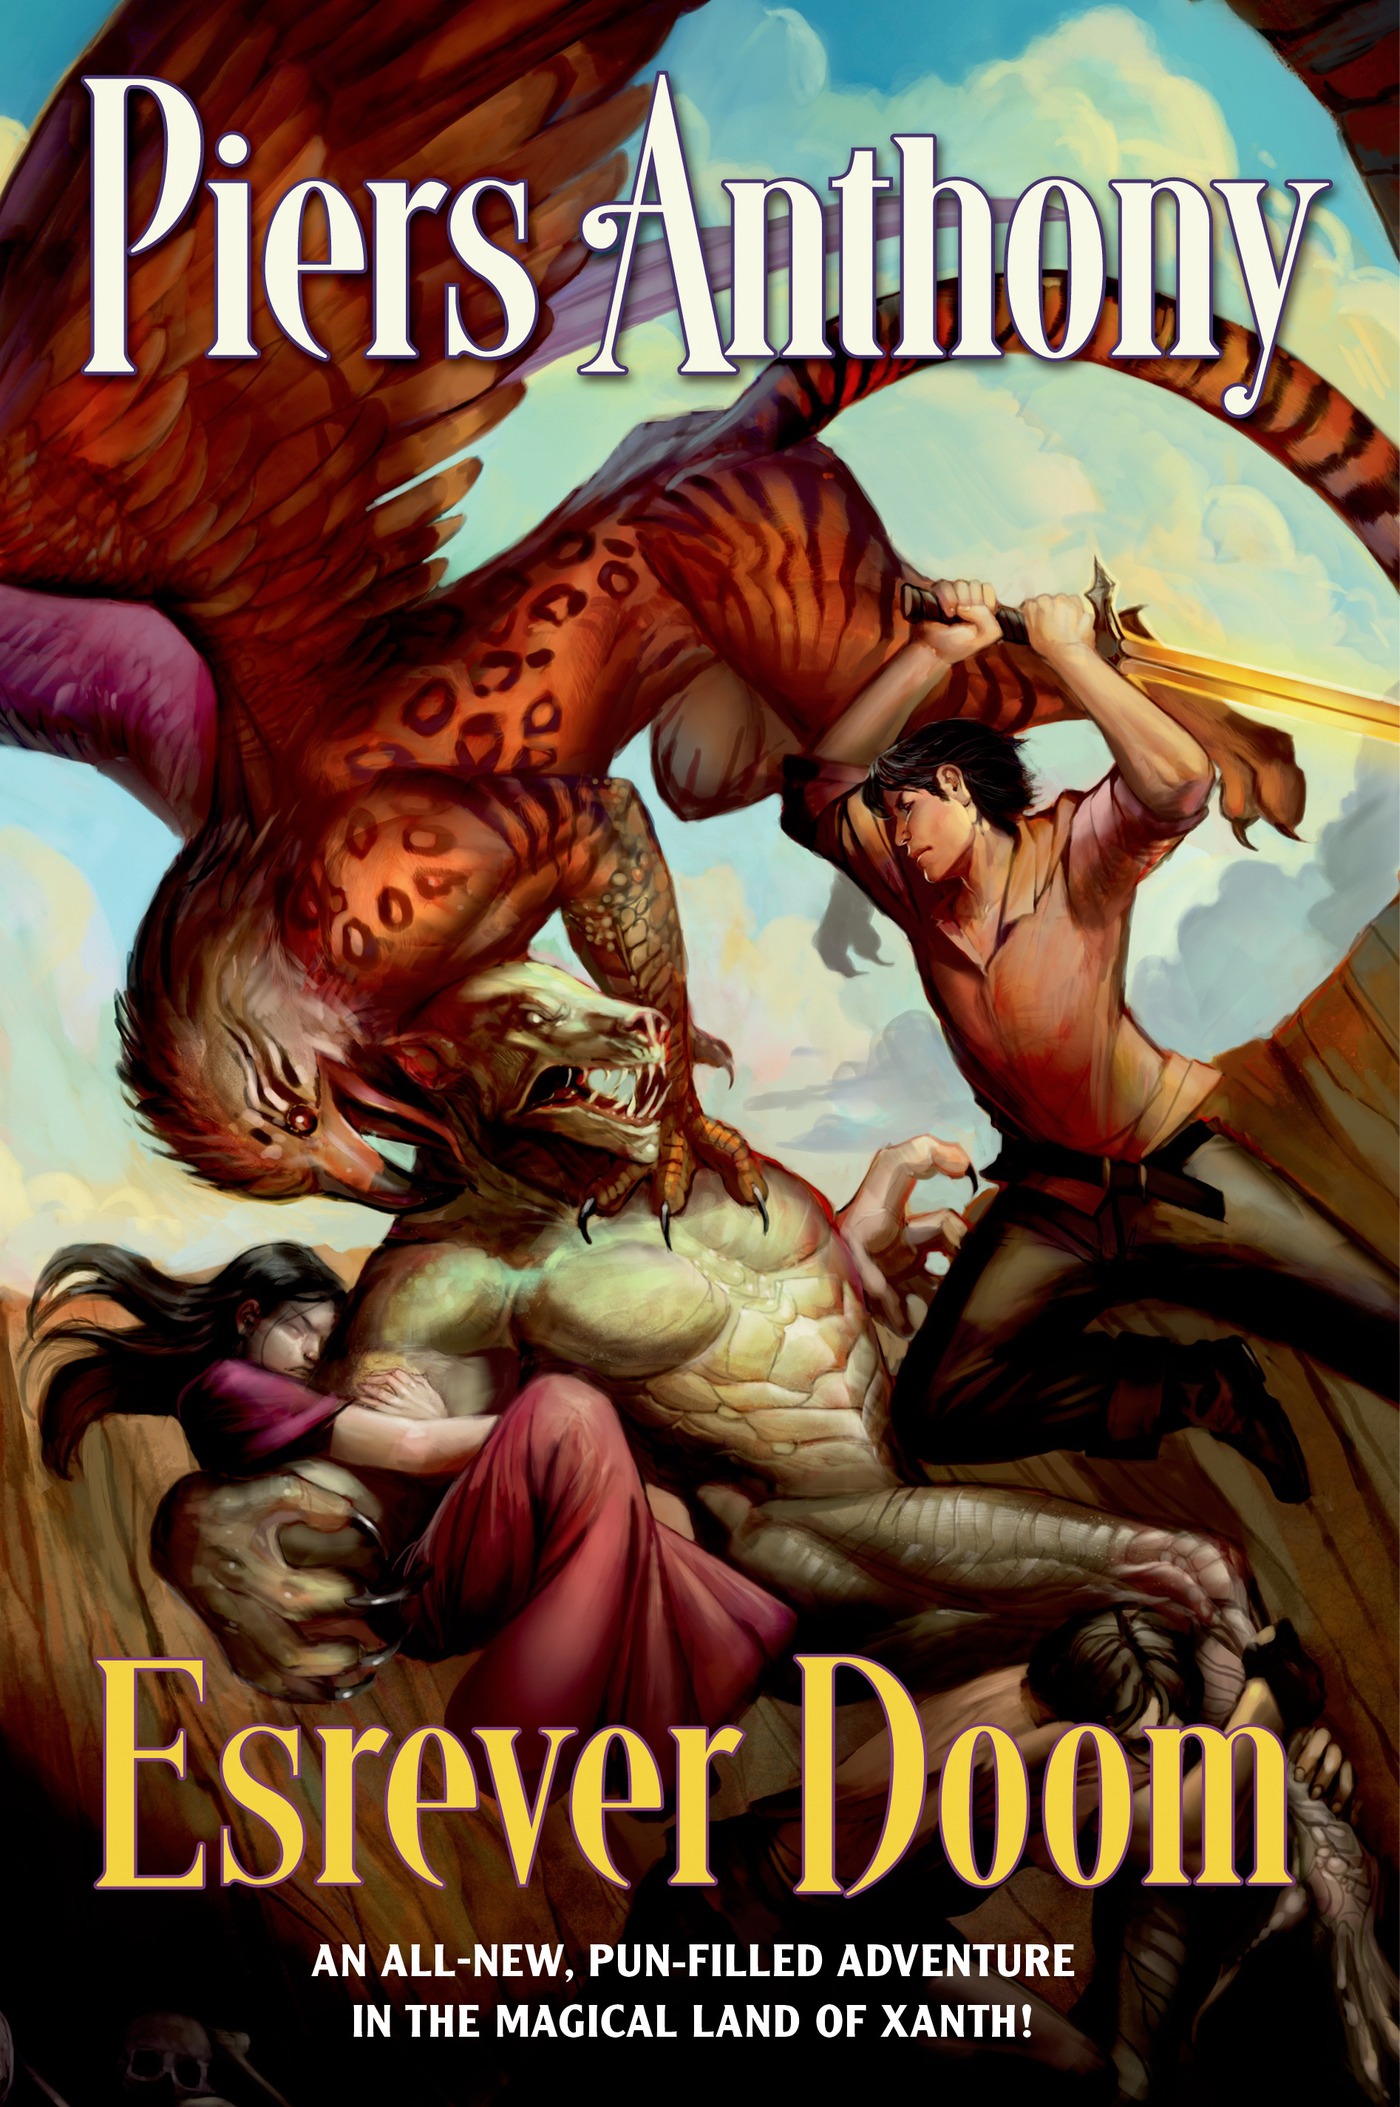 Esrever Doom : A Fun-Filled Adventure in the Magical Land of Xanth by Piers Anthony